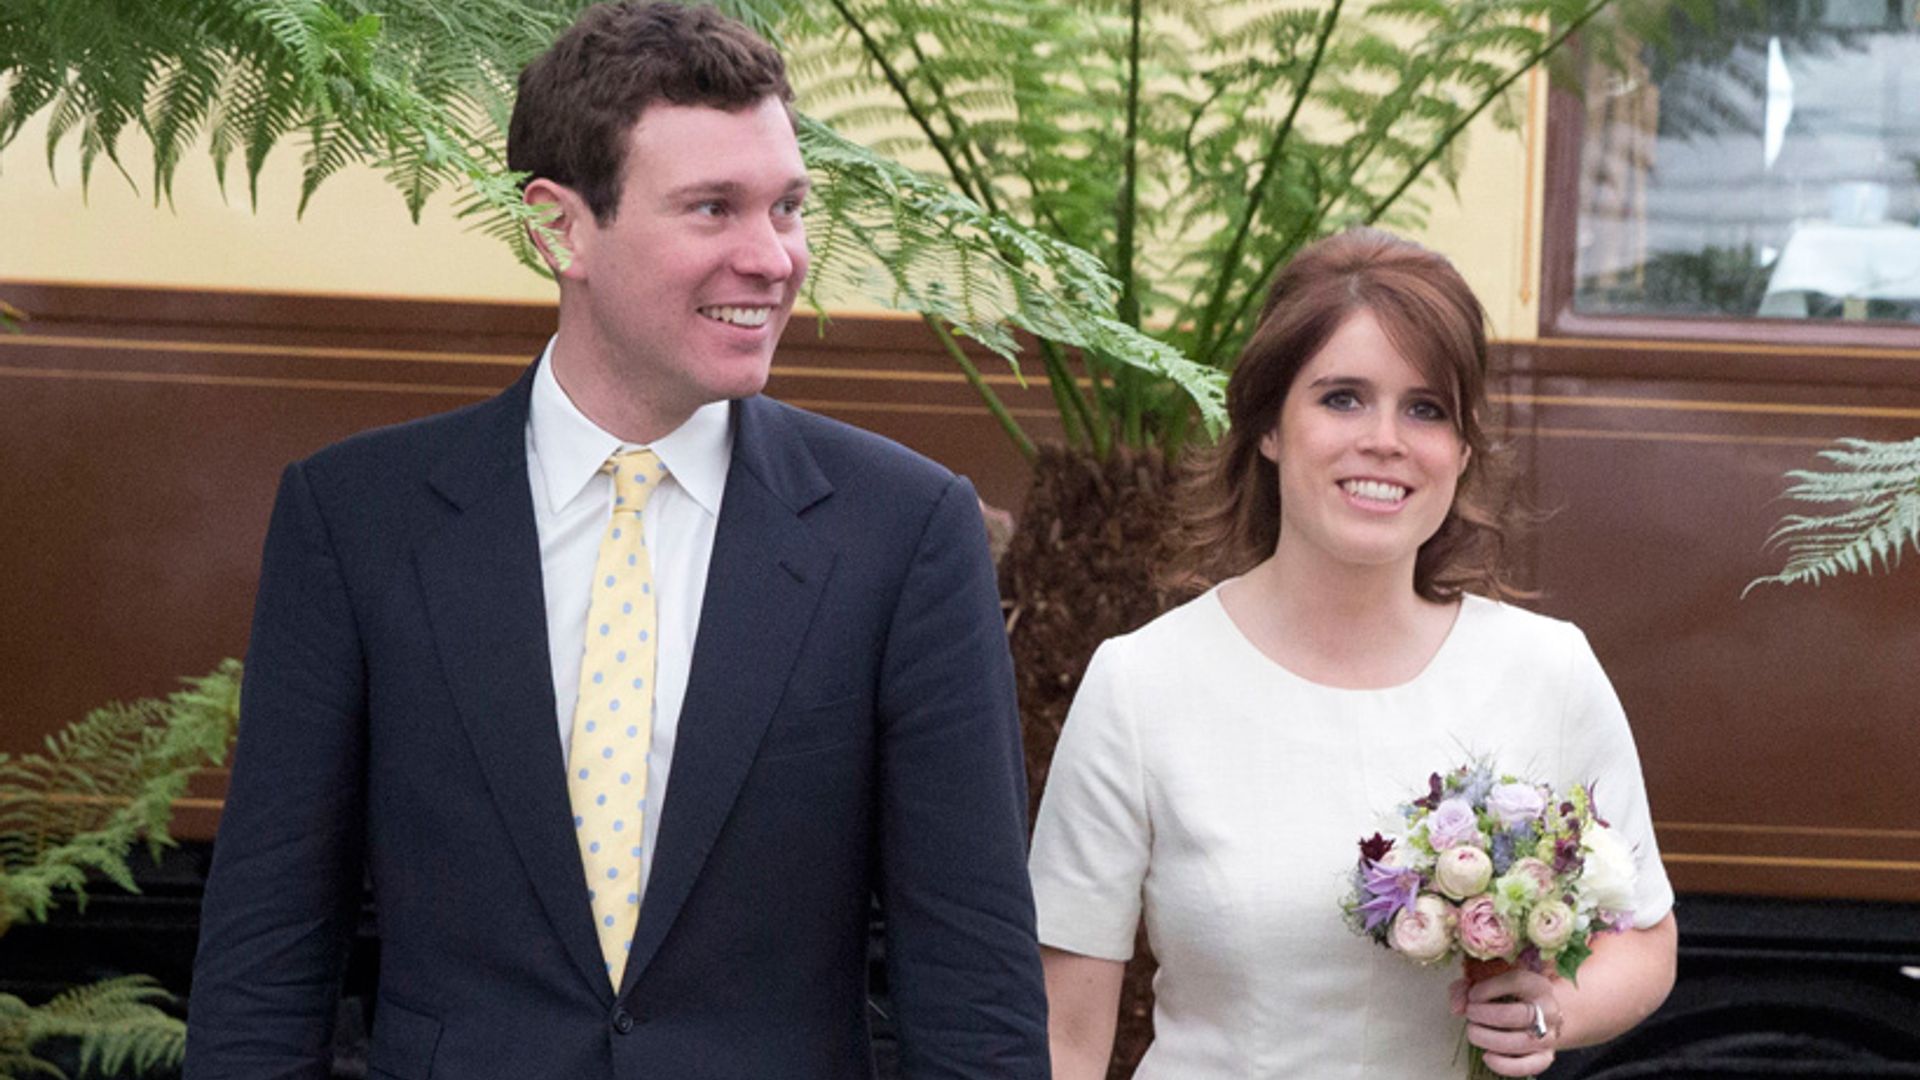 Princess Eugenie and Jack Brooksbank's royal wedding details: the cake, the bridal party, the maid of honour and more